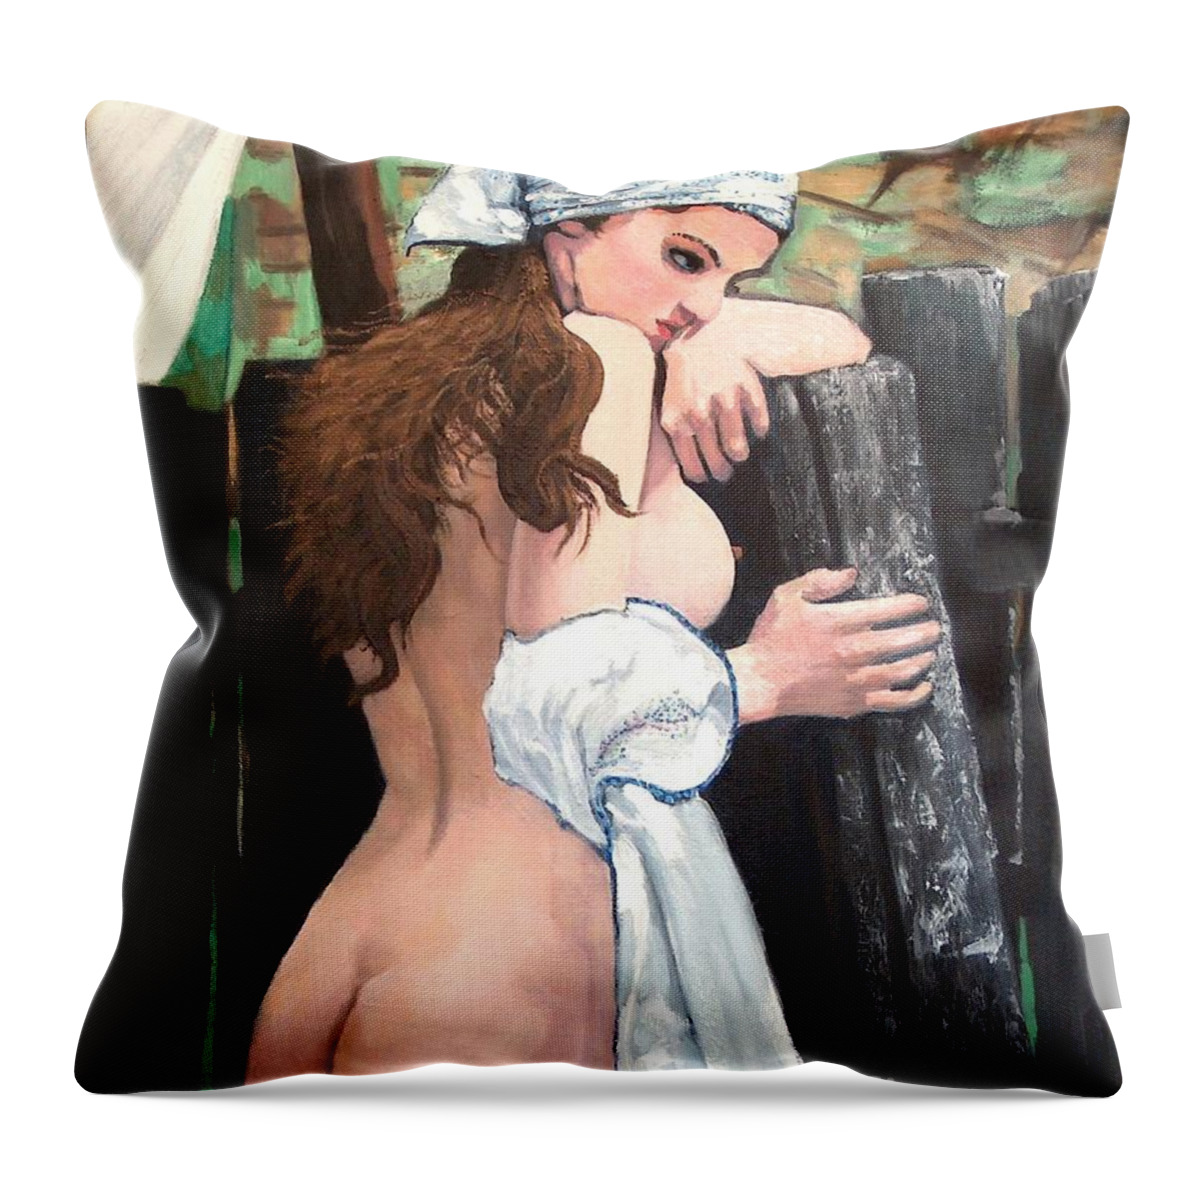 Nude Throw Pillow featuring the painting Laundry Day by William Michel